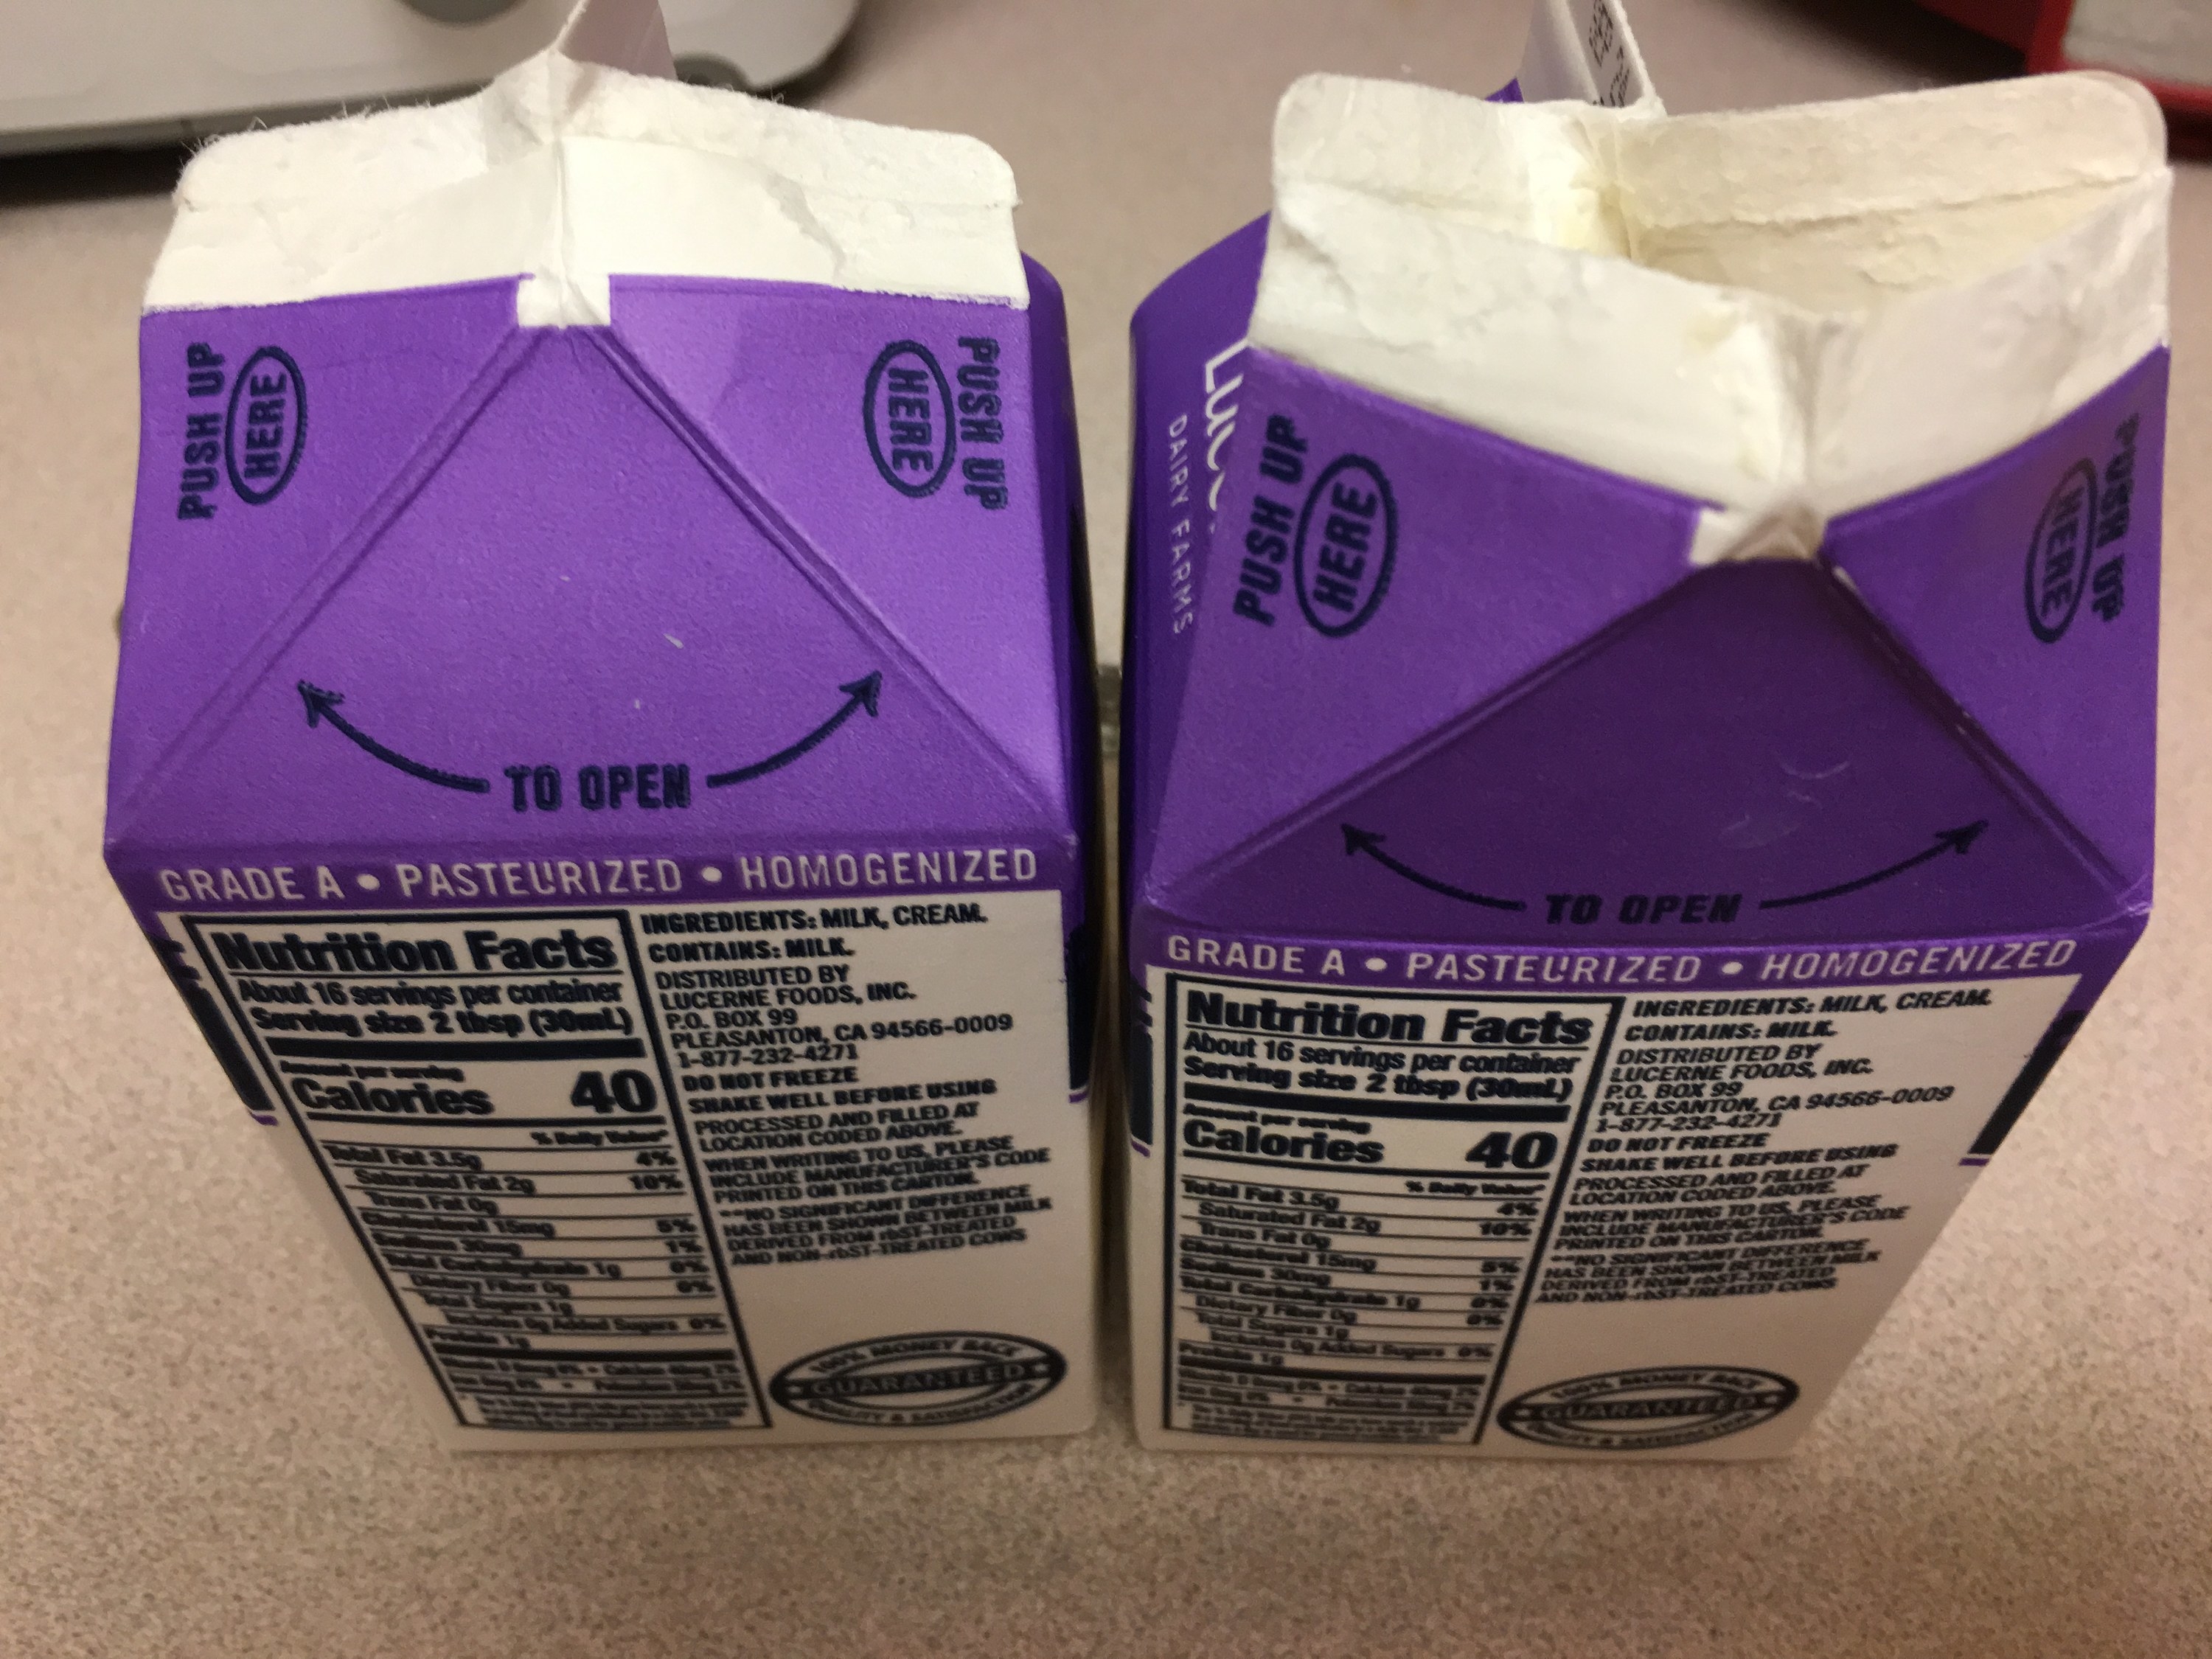 Two opened cartons of milk